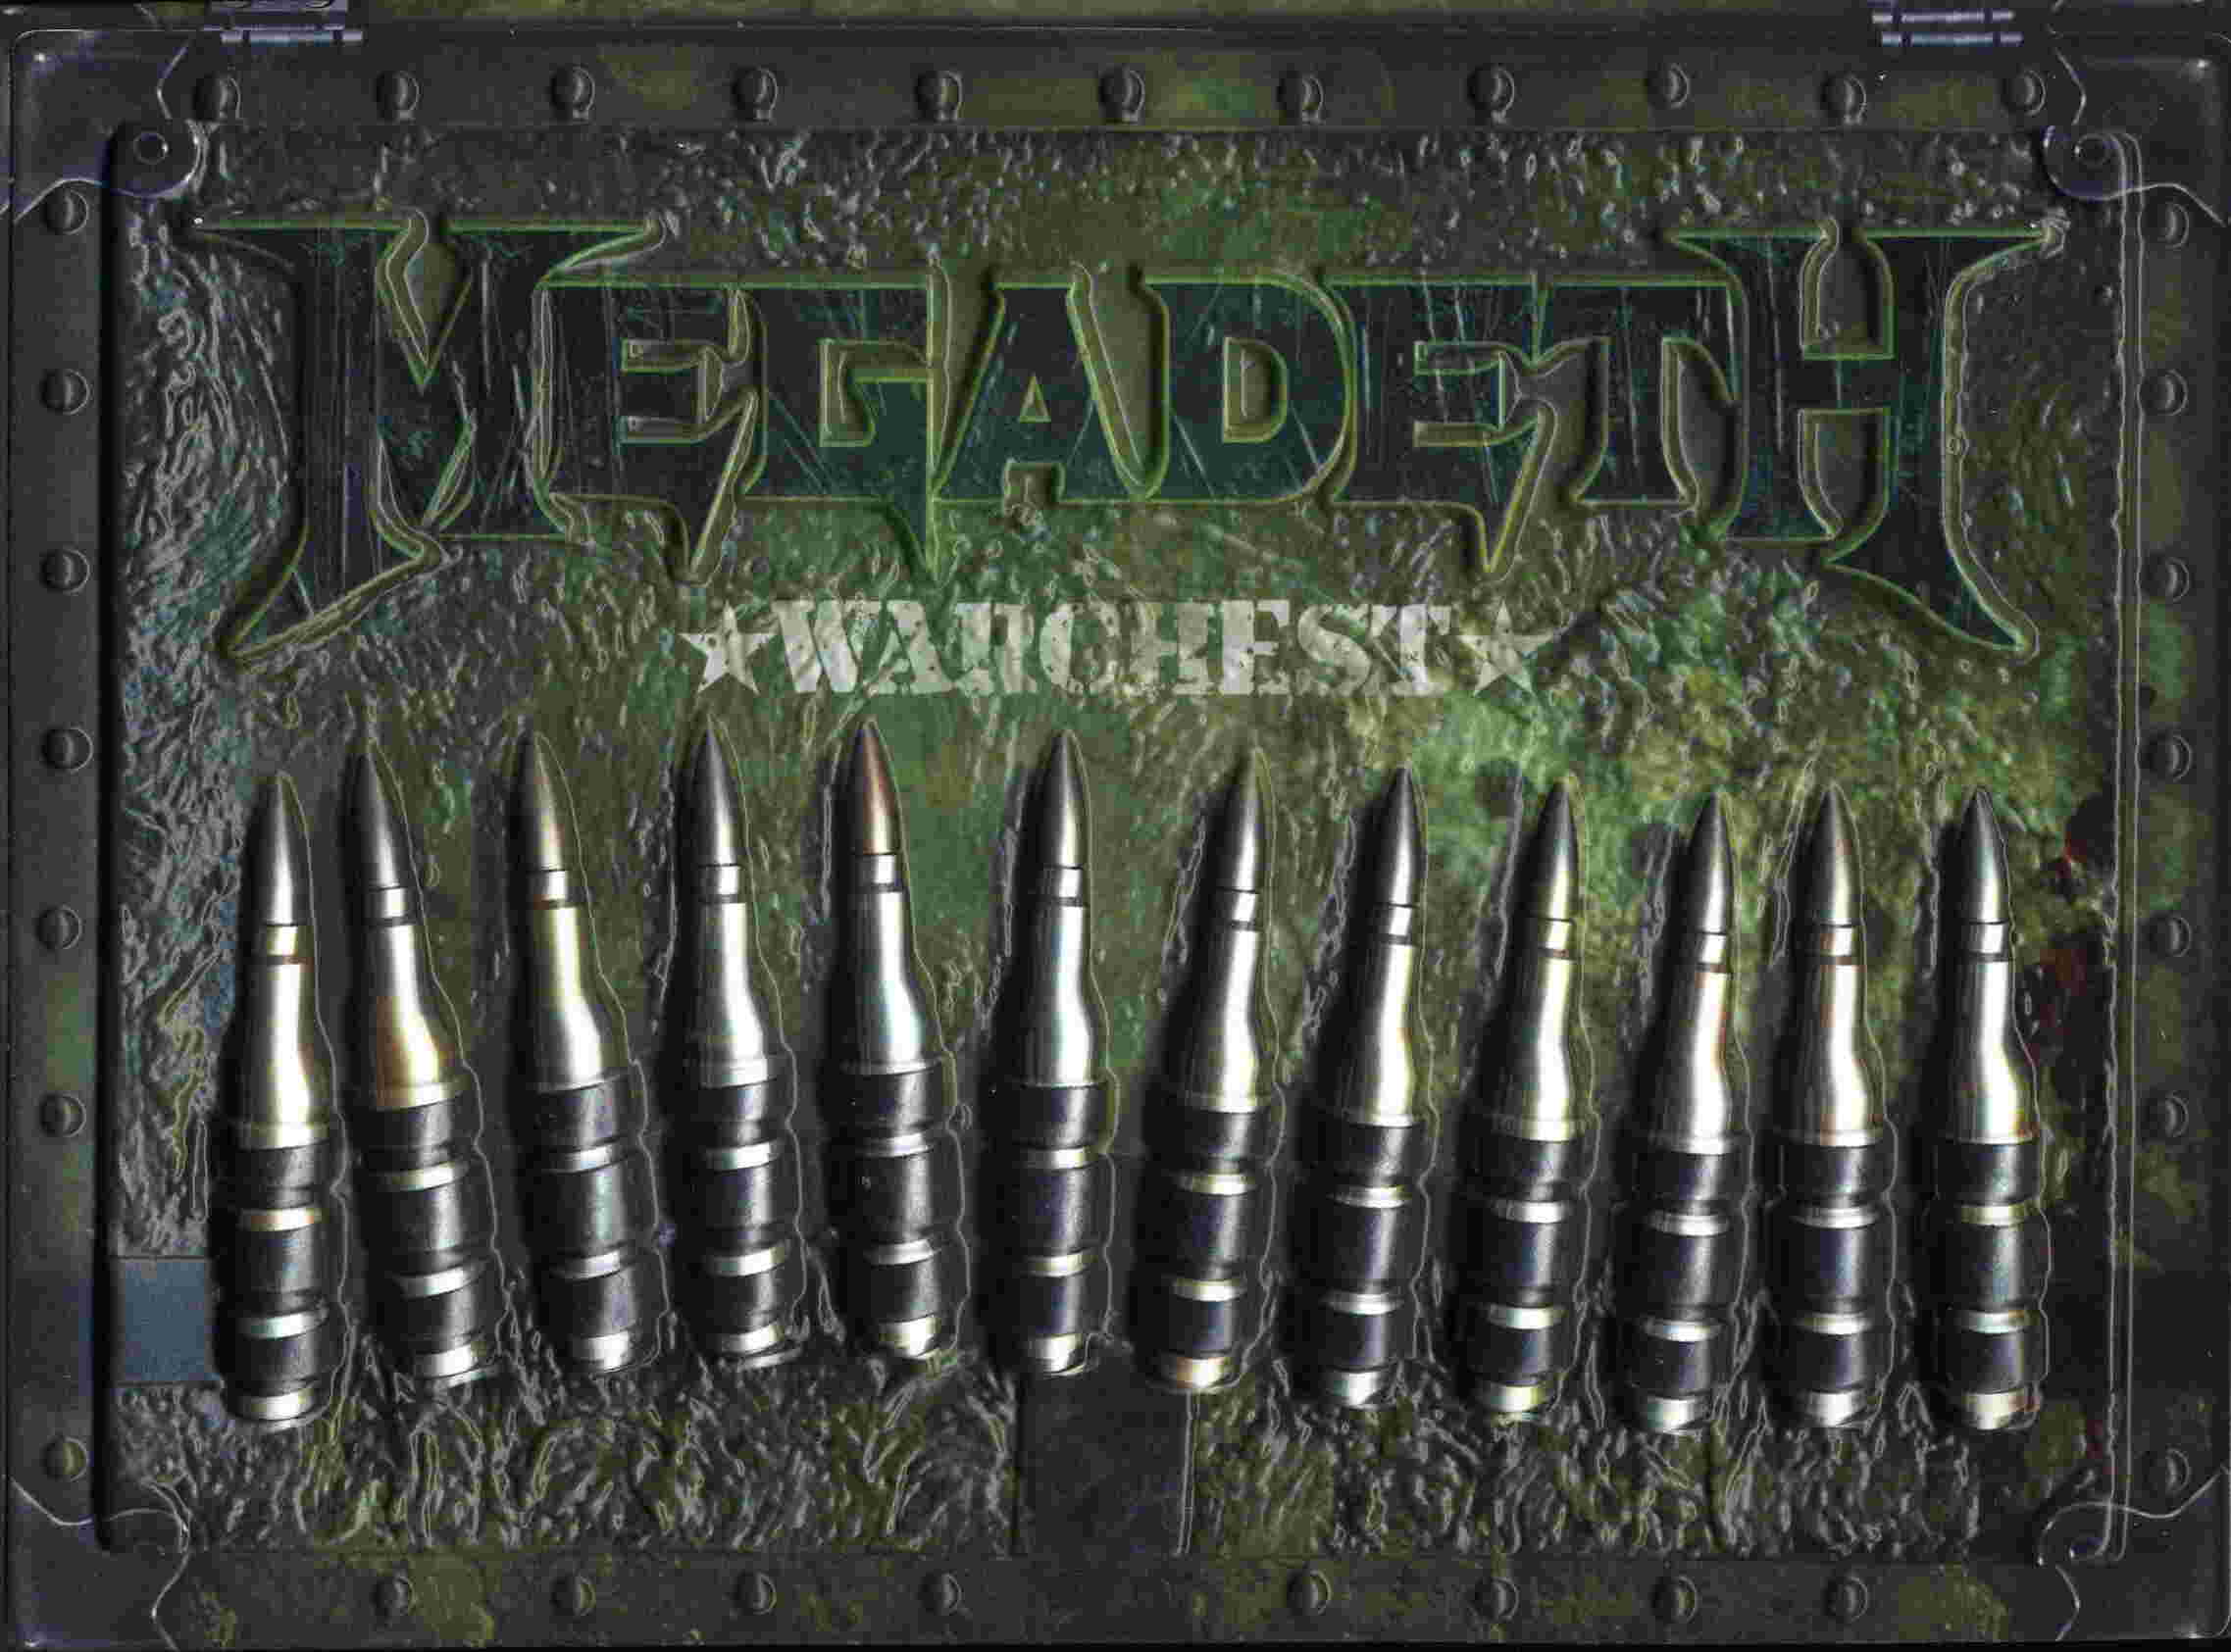 Megadeth Wallpaper HD Pictures